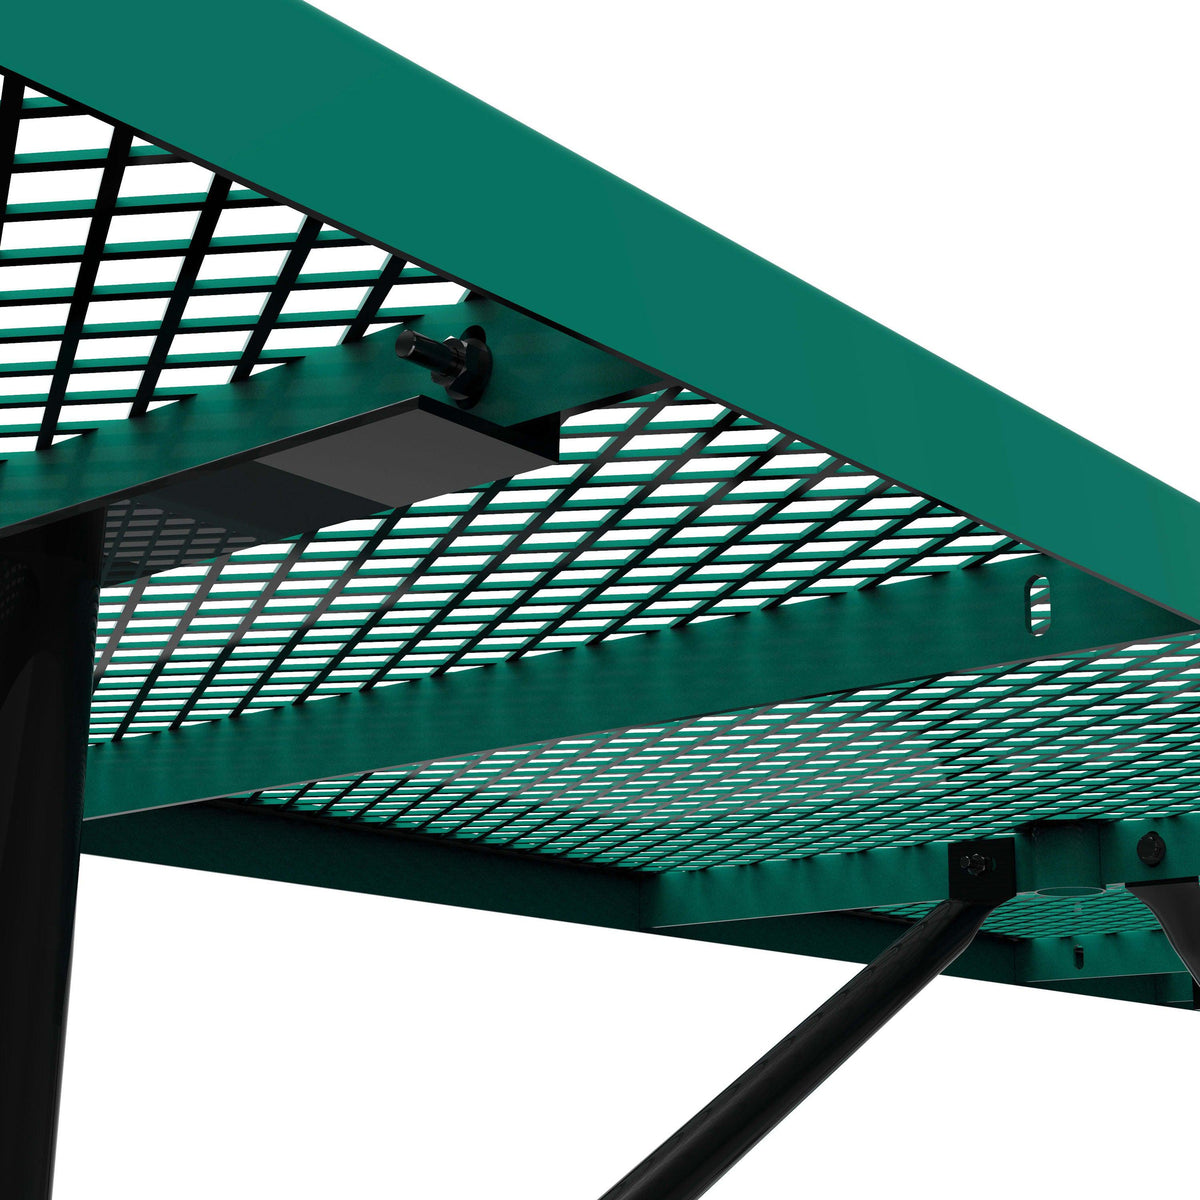 Green,8' |#| Commercial Grade 8' Rectangular Expanded Mesh Metal Outdoor Picnic Table - Black